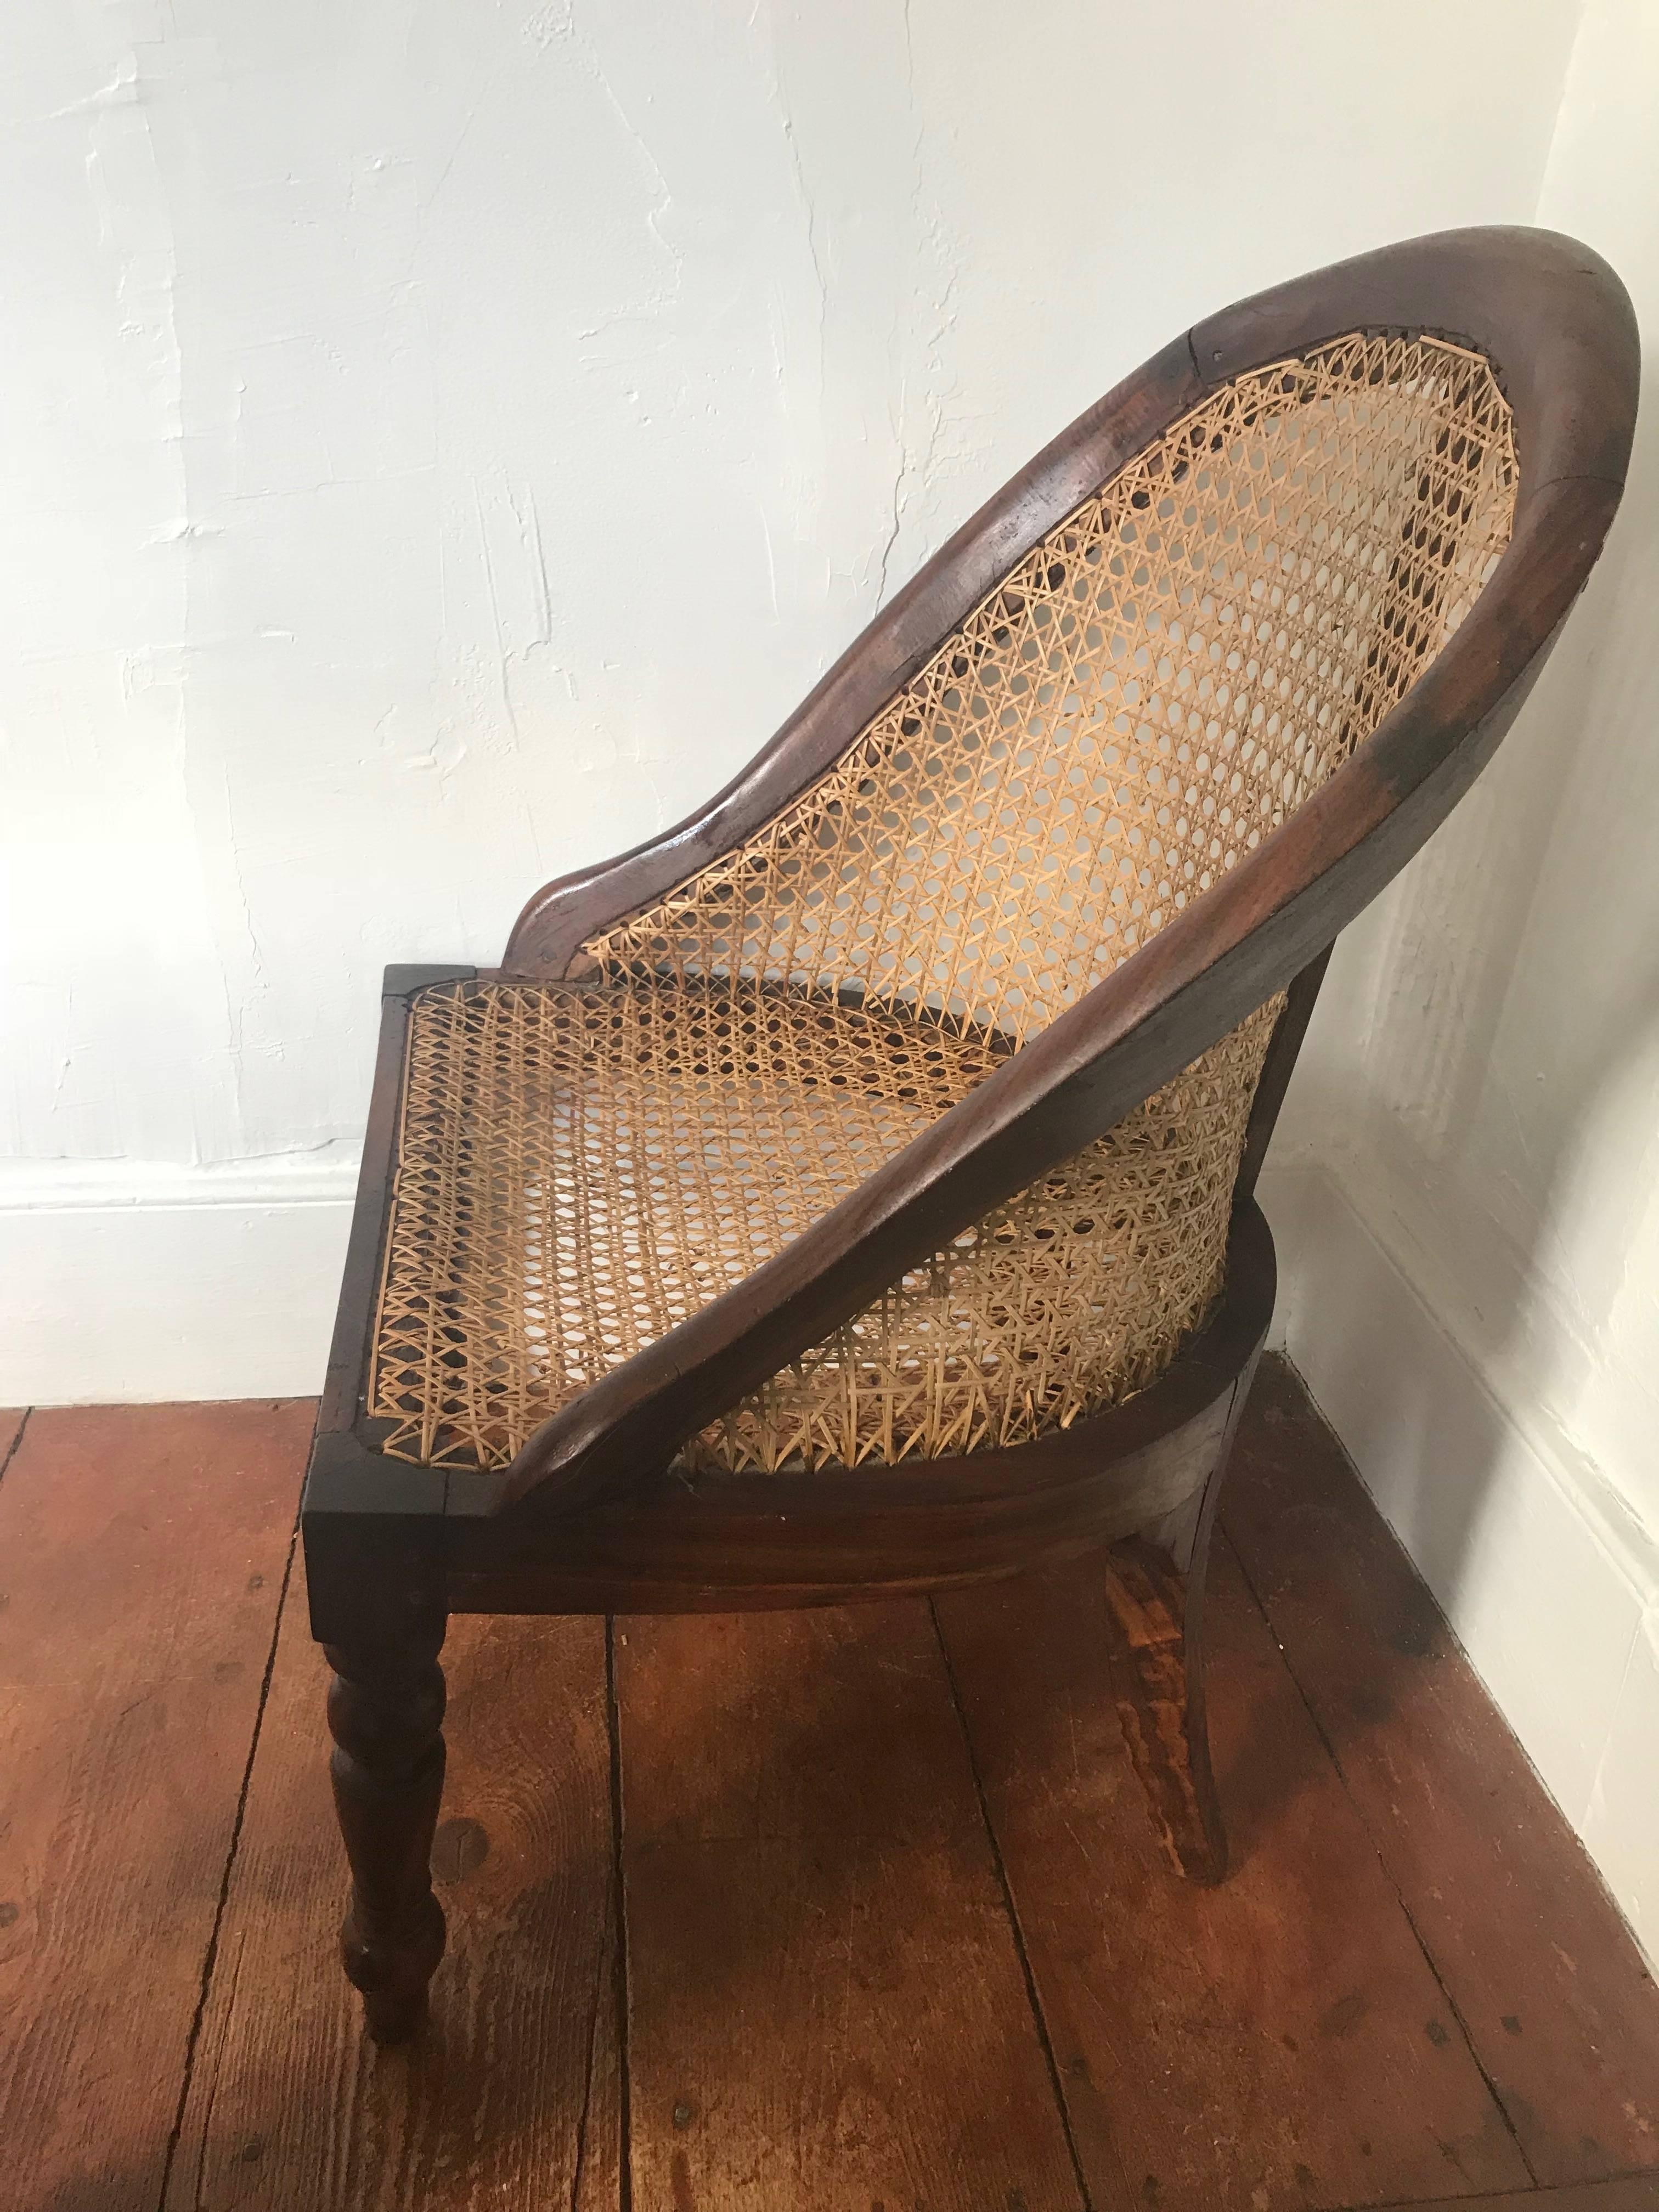 British Colonial, Ceylonese, Nadoun wood and caned nursery chair, circa 1900. Beautiful rounded back with hand-caned seat and back, sitting on turned legs.
Nadoun wood is native to Sri Lanka and has natural striations running through it. This is a